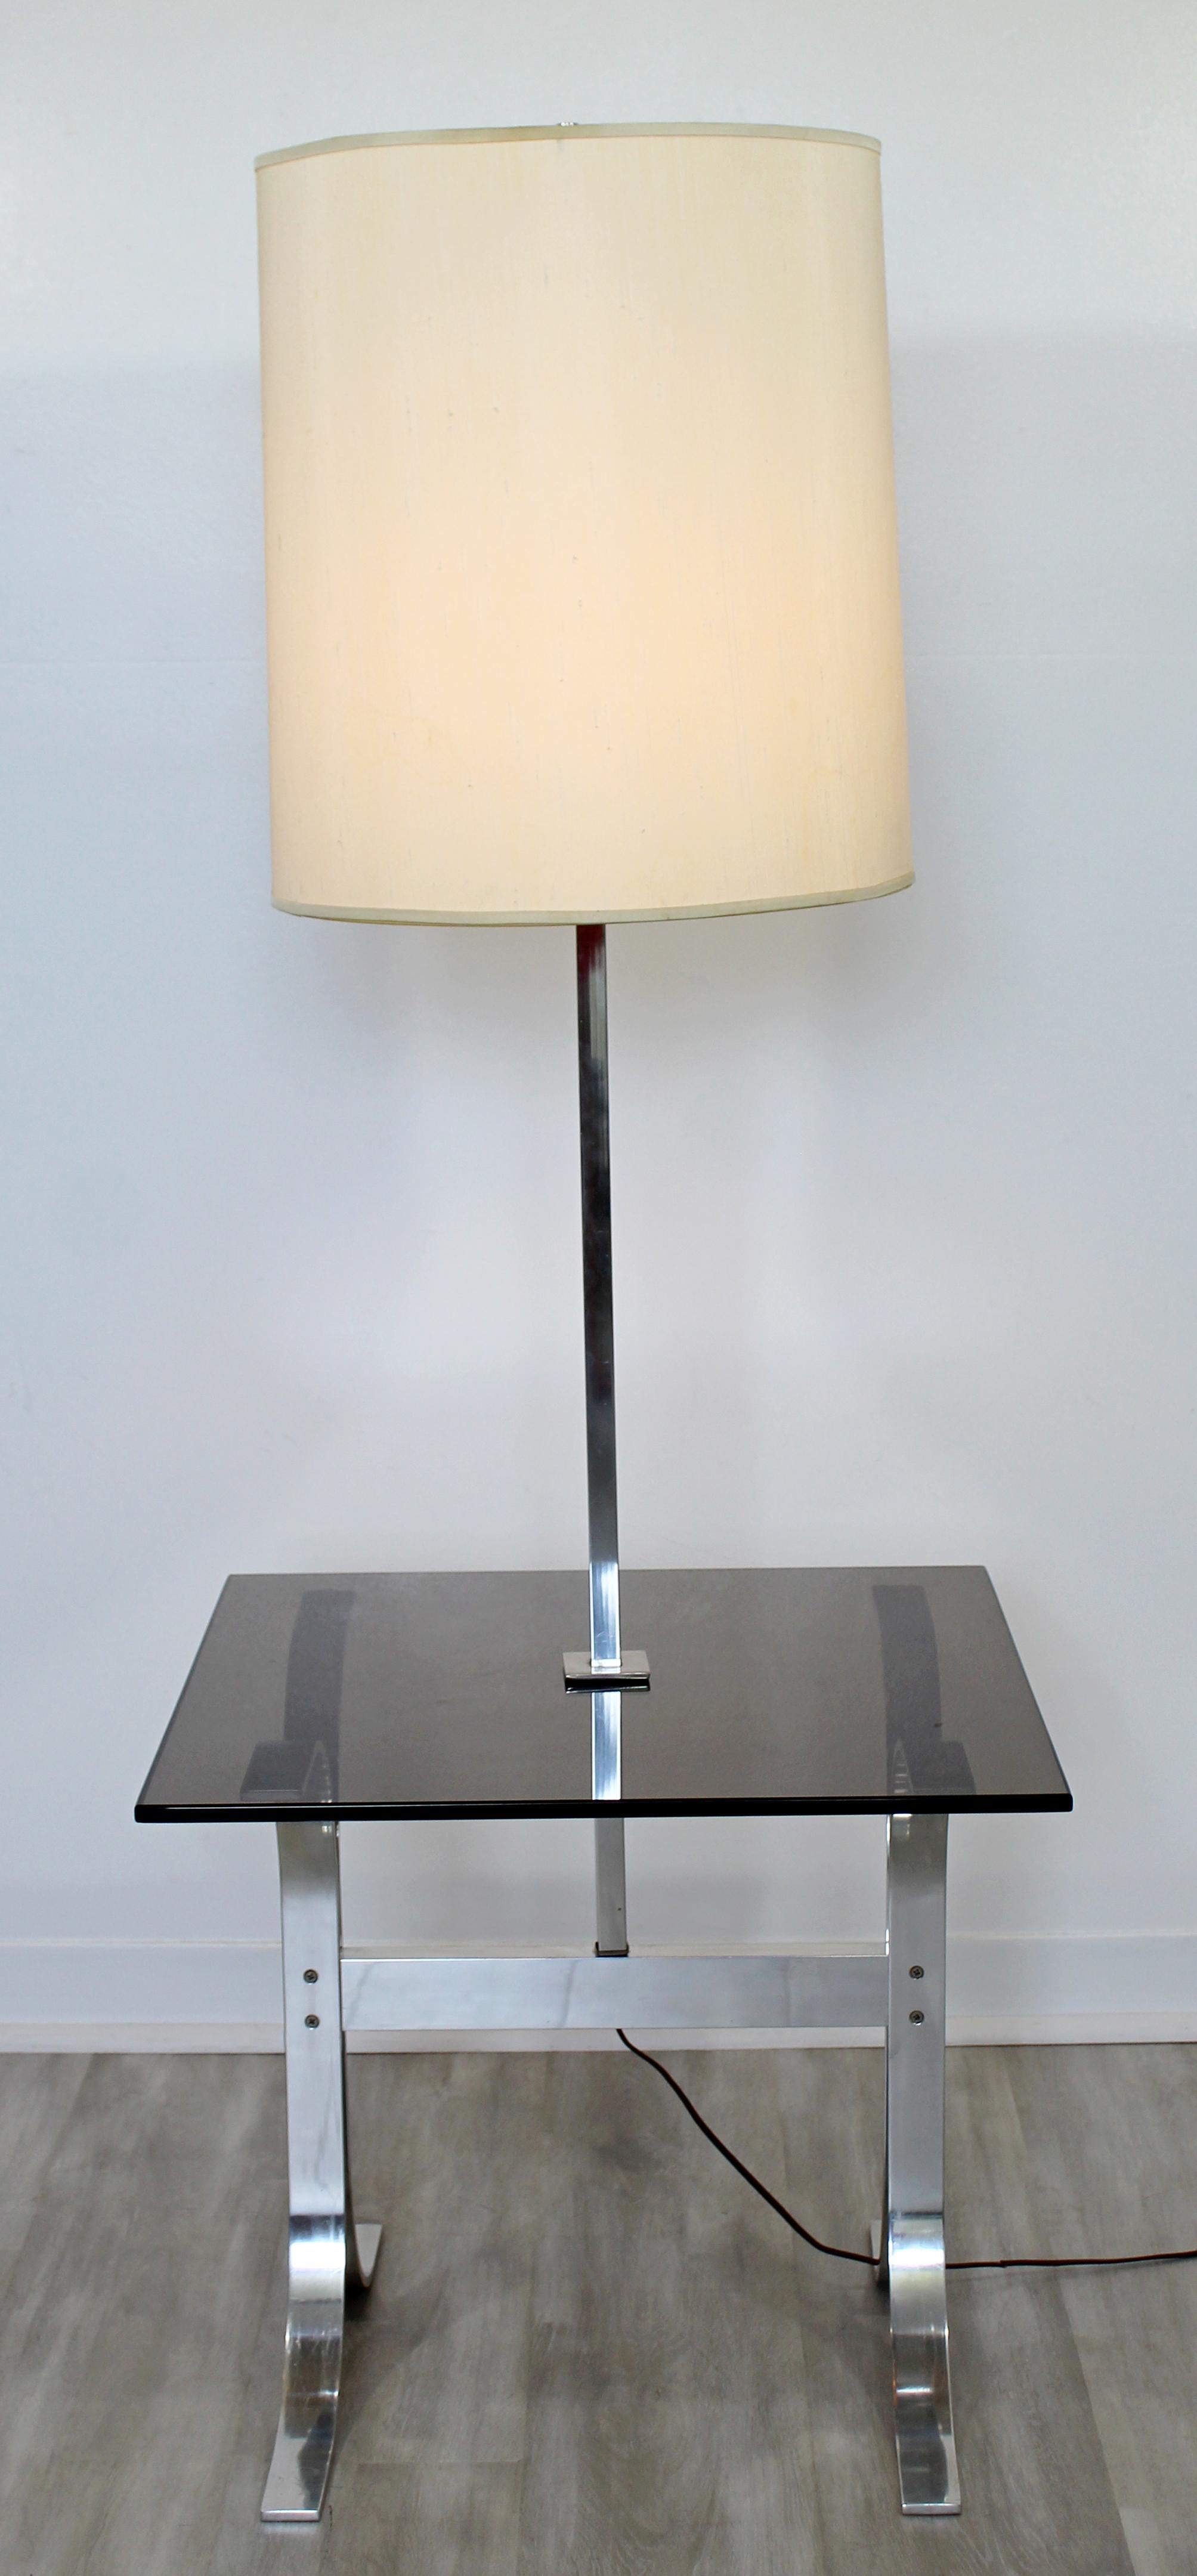 For your consideration is a gorgeous, chrome floor lamp, with a smoked glass table attached, circa 1970s. Includes original shade and finial. In very good vintage condition. The dimensions are 22